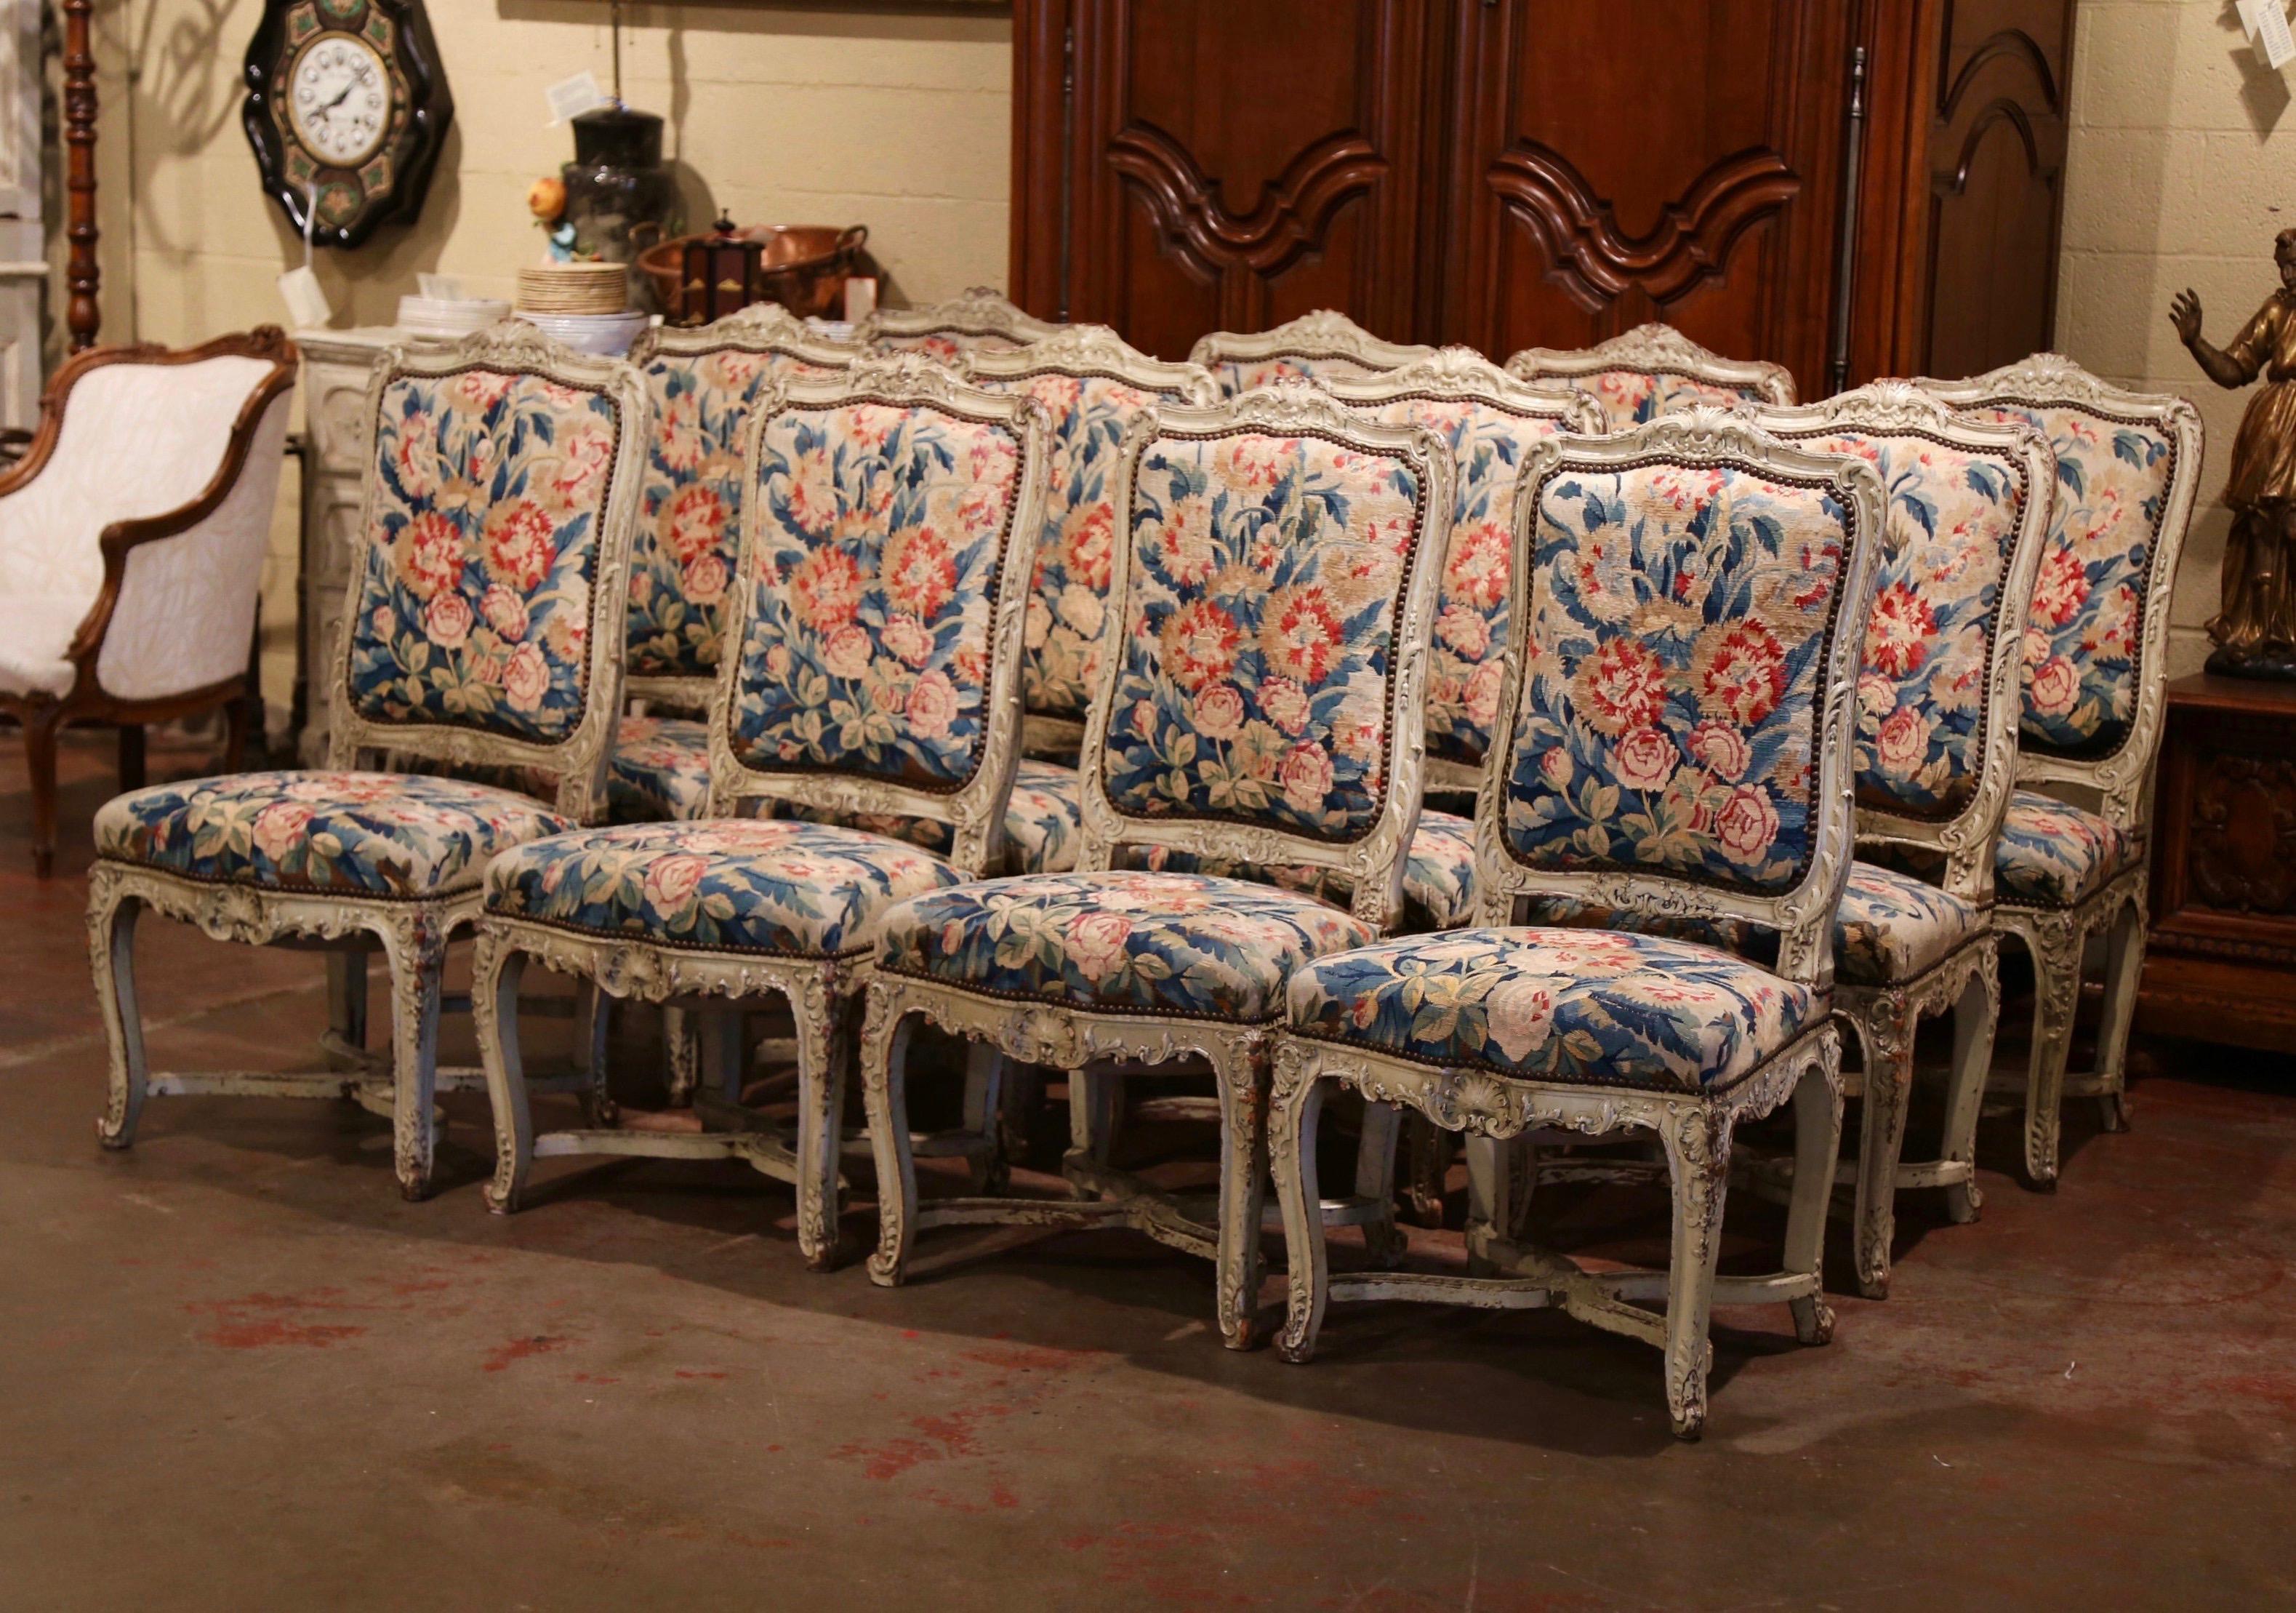 Decorate a dining room with this exceptional suite of twelve antique and colorful chairs; crafted in Paris, France, circa 1820, each large chair stands on elegant cabriole legs decorated with acanthus and floral motifs, ending with escargot feet